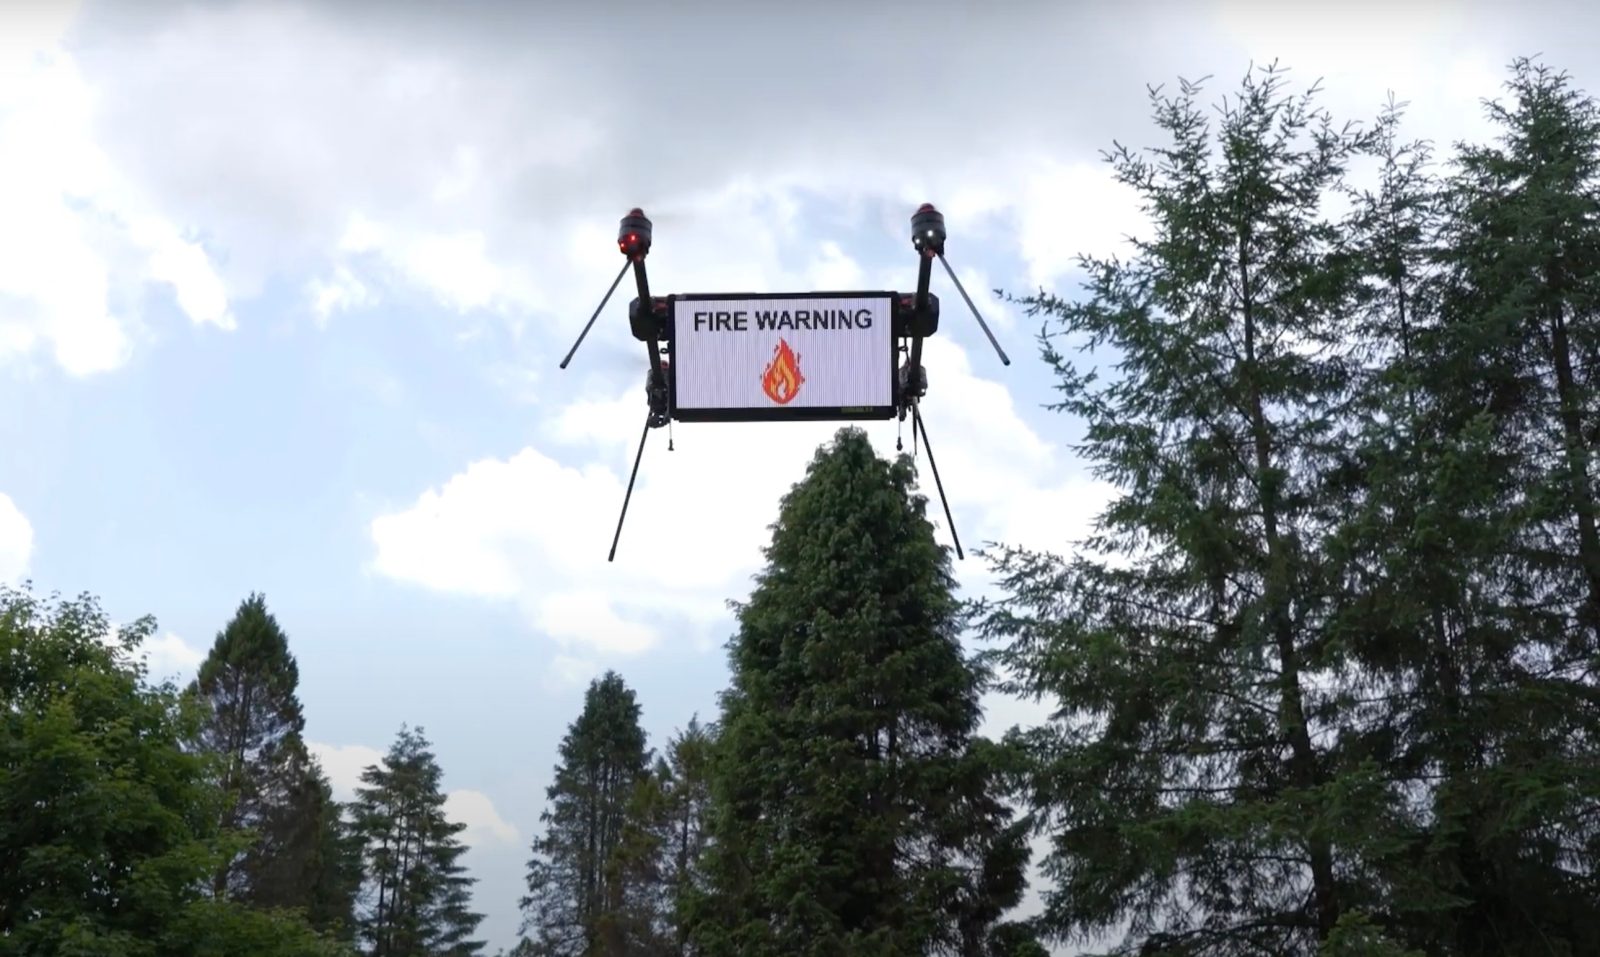 Draganfly drone messaging